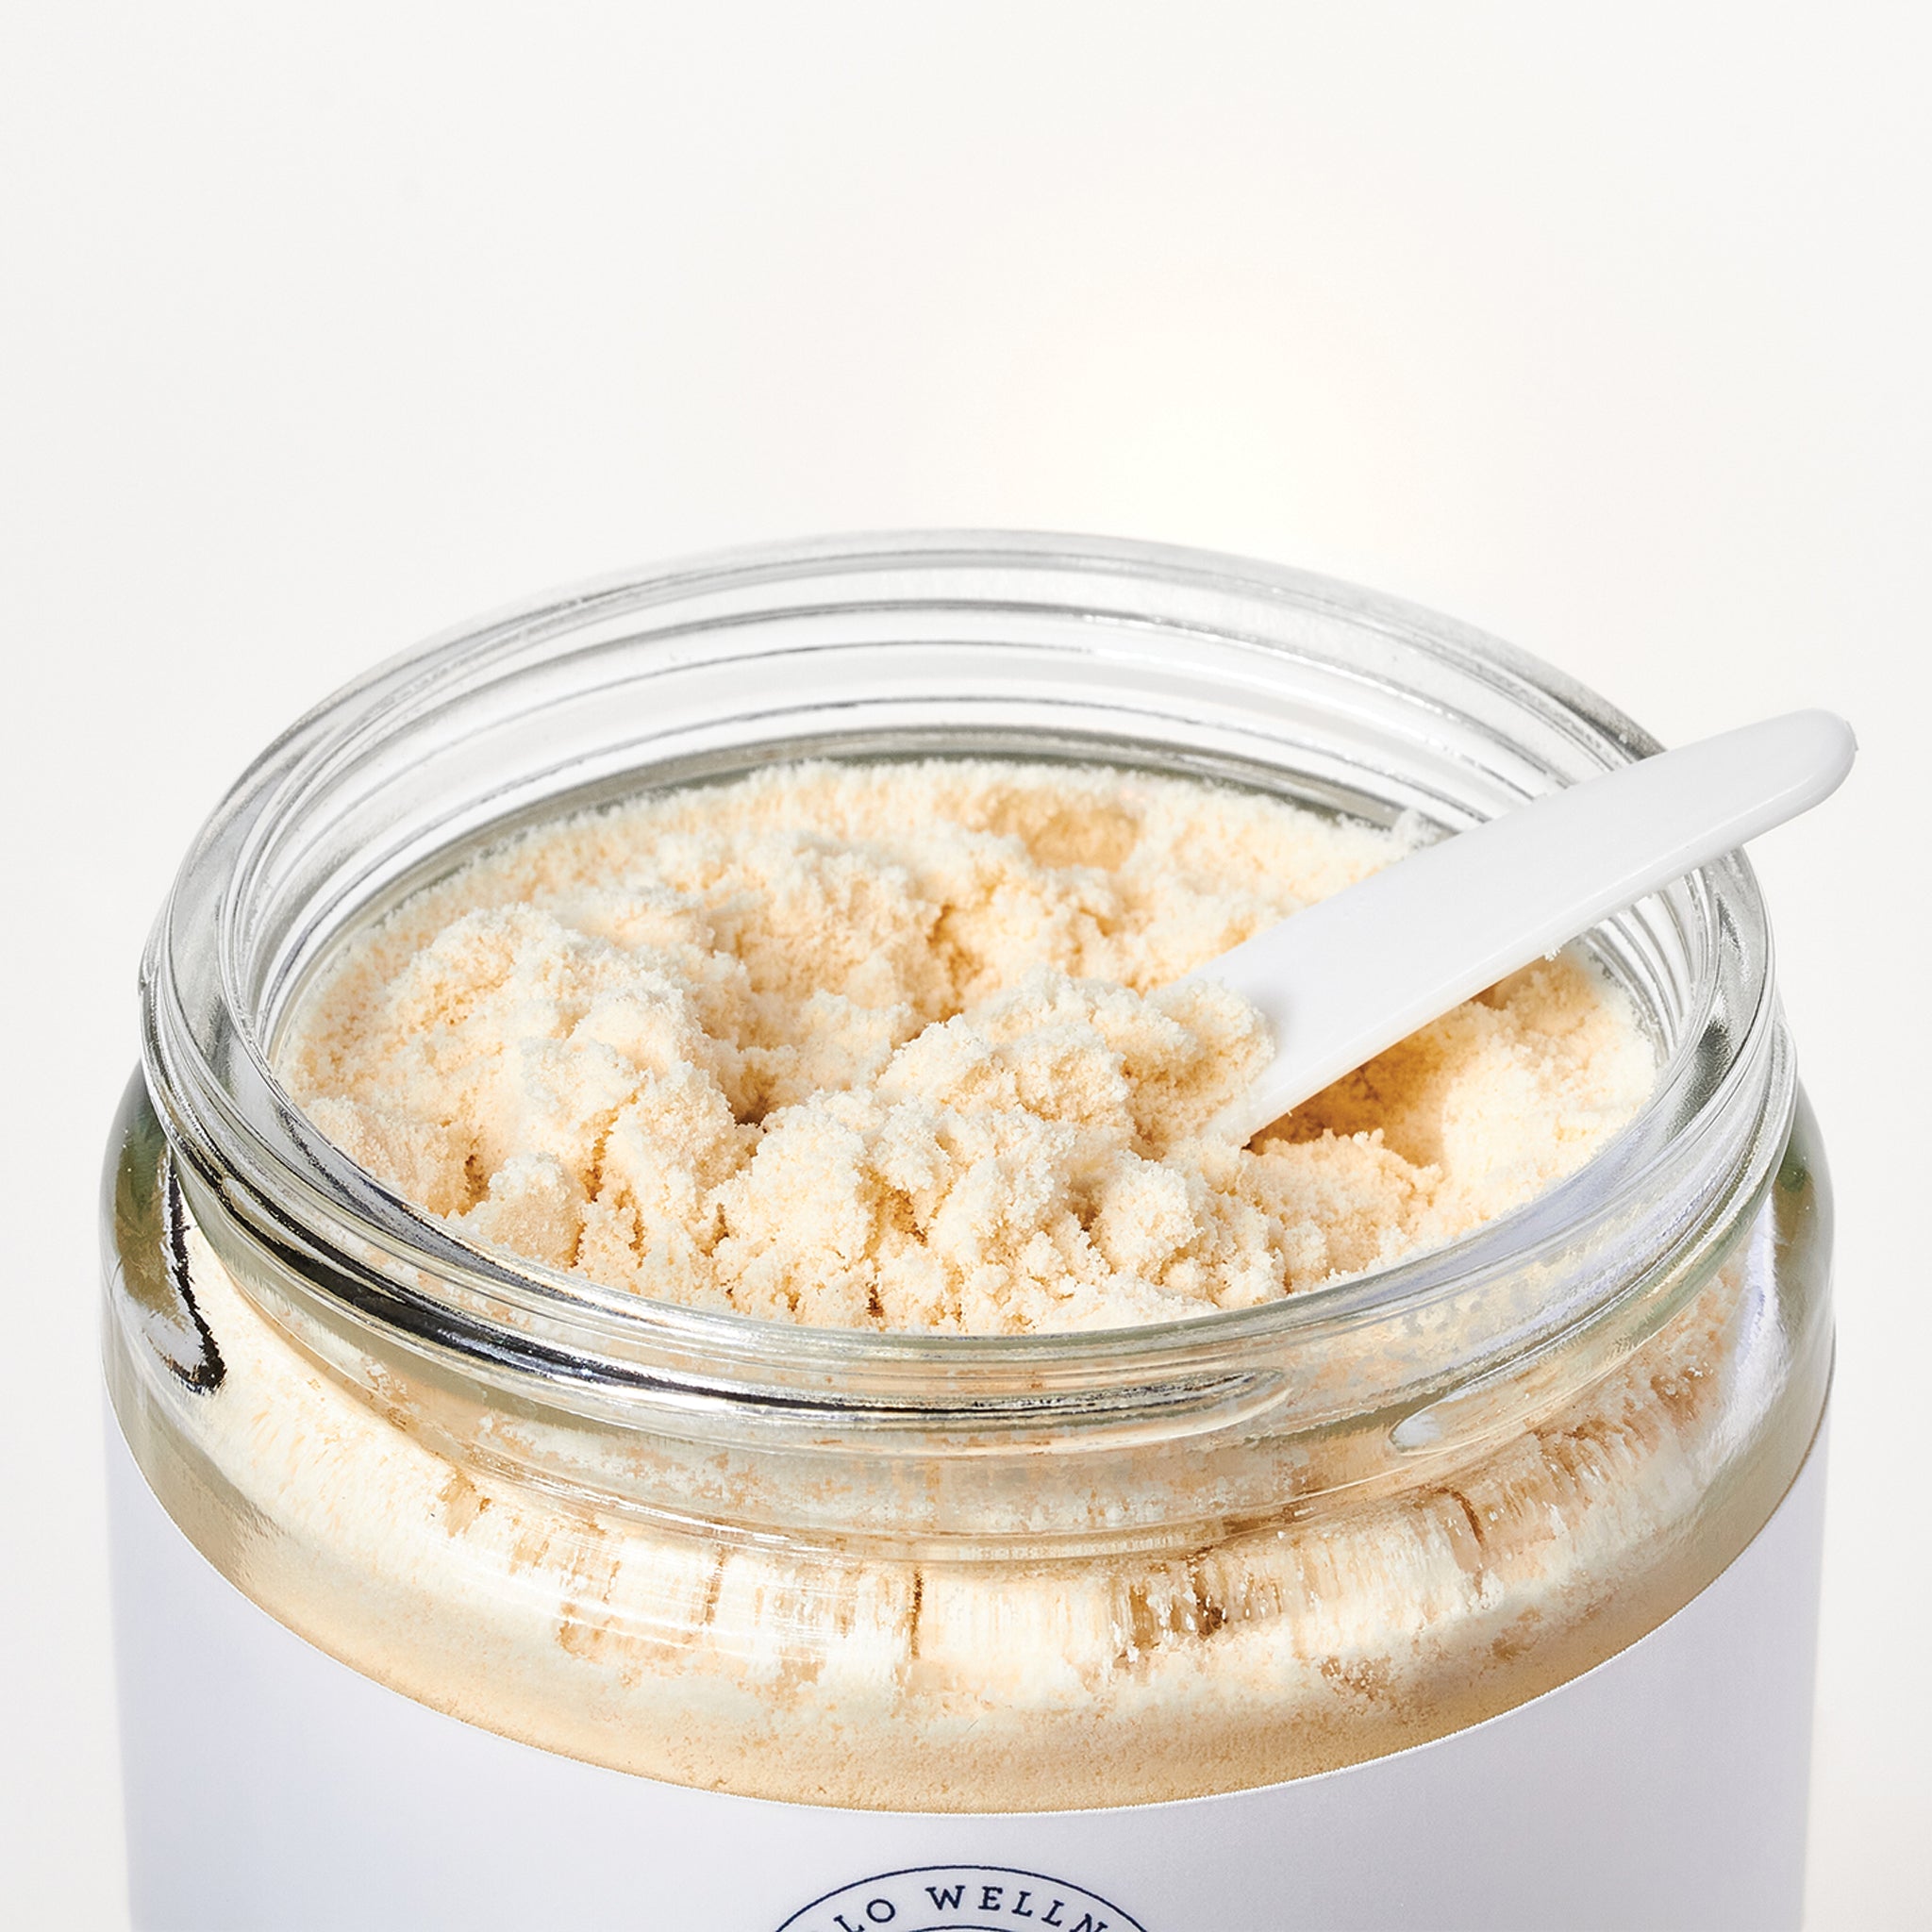 An open jar of Coconut Milk Bath Soak by Hello Wellness. Coconut powder to soothe and moisturize dry skin.